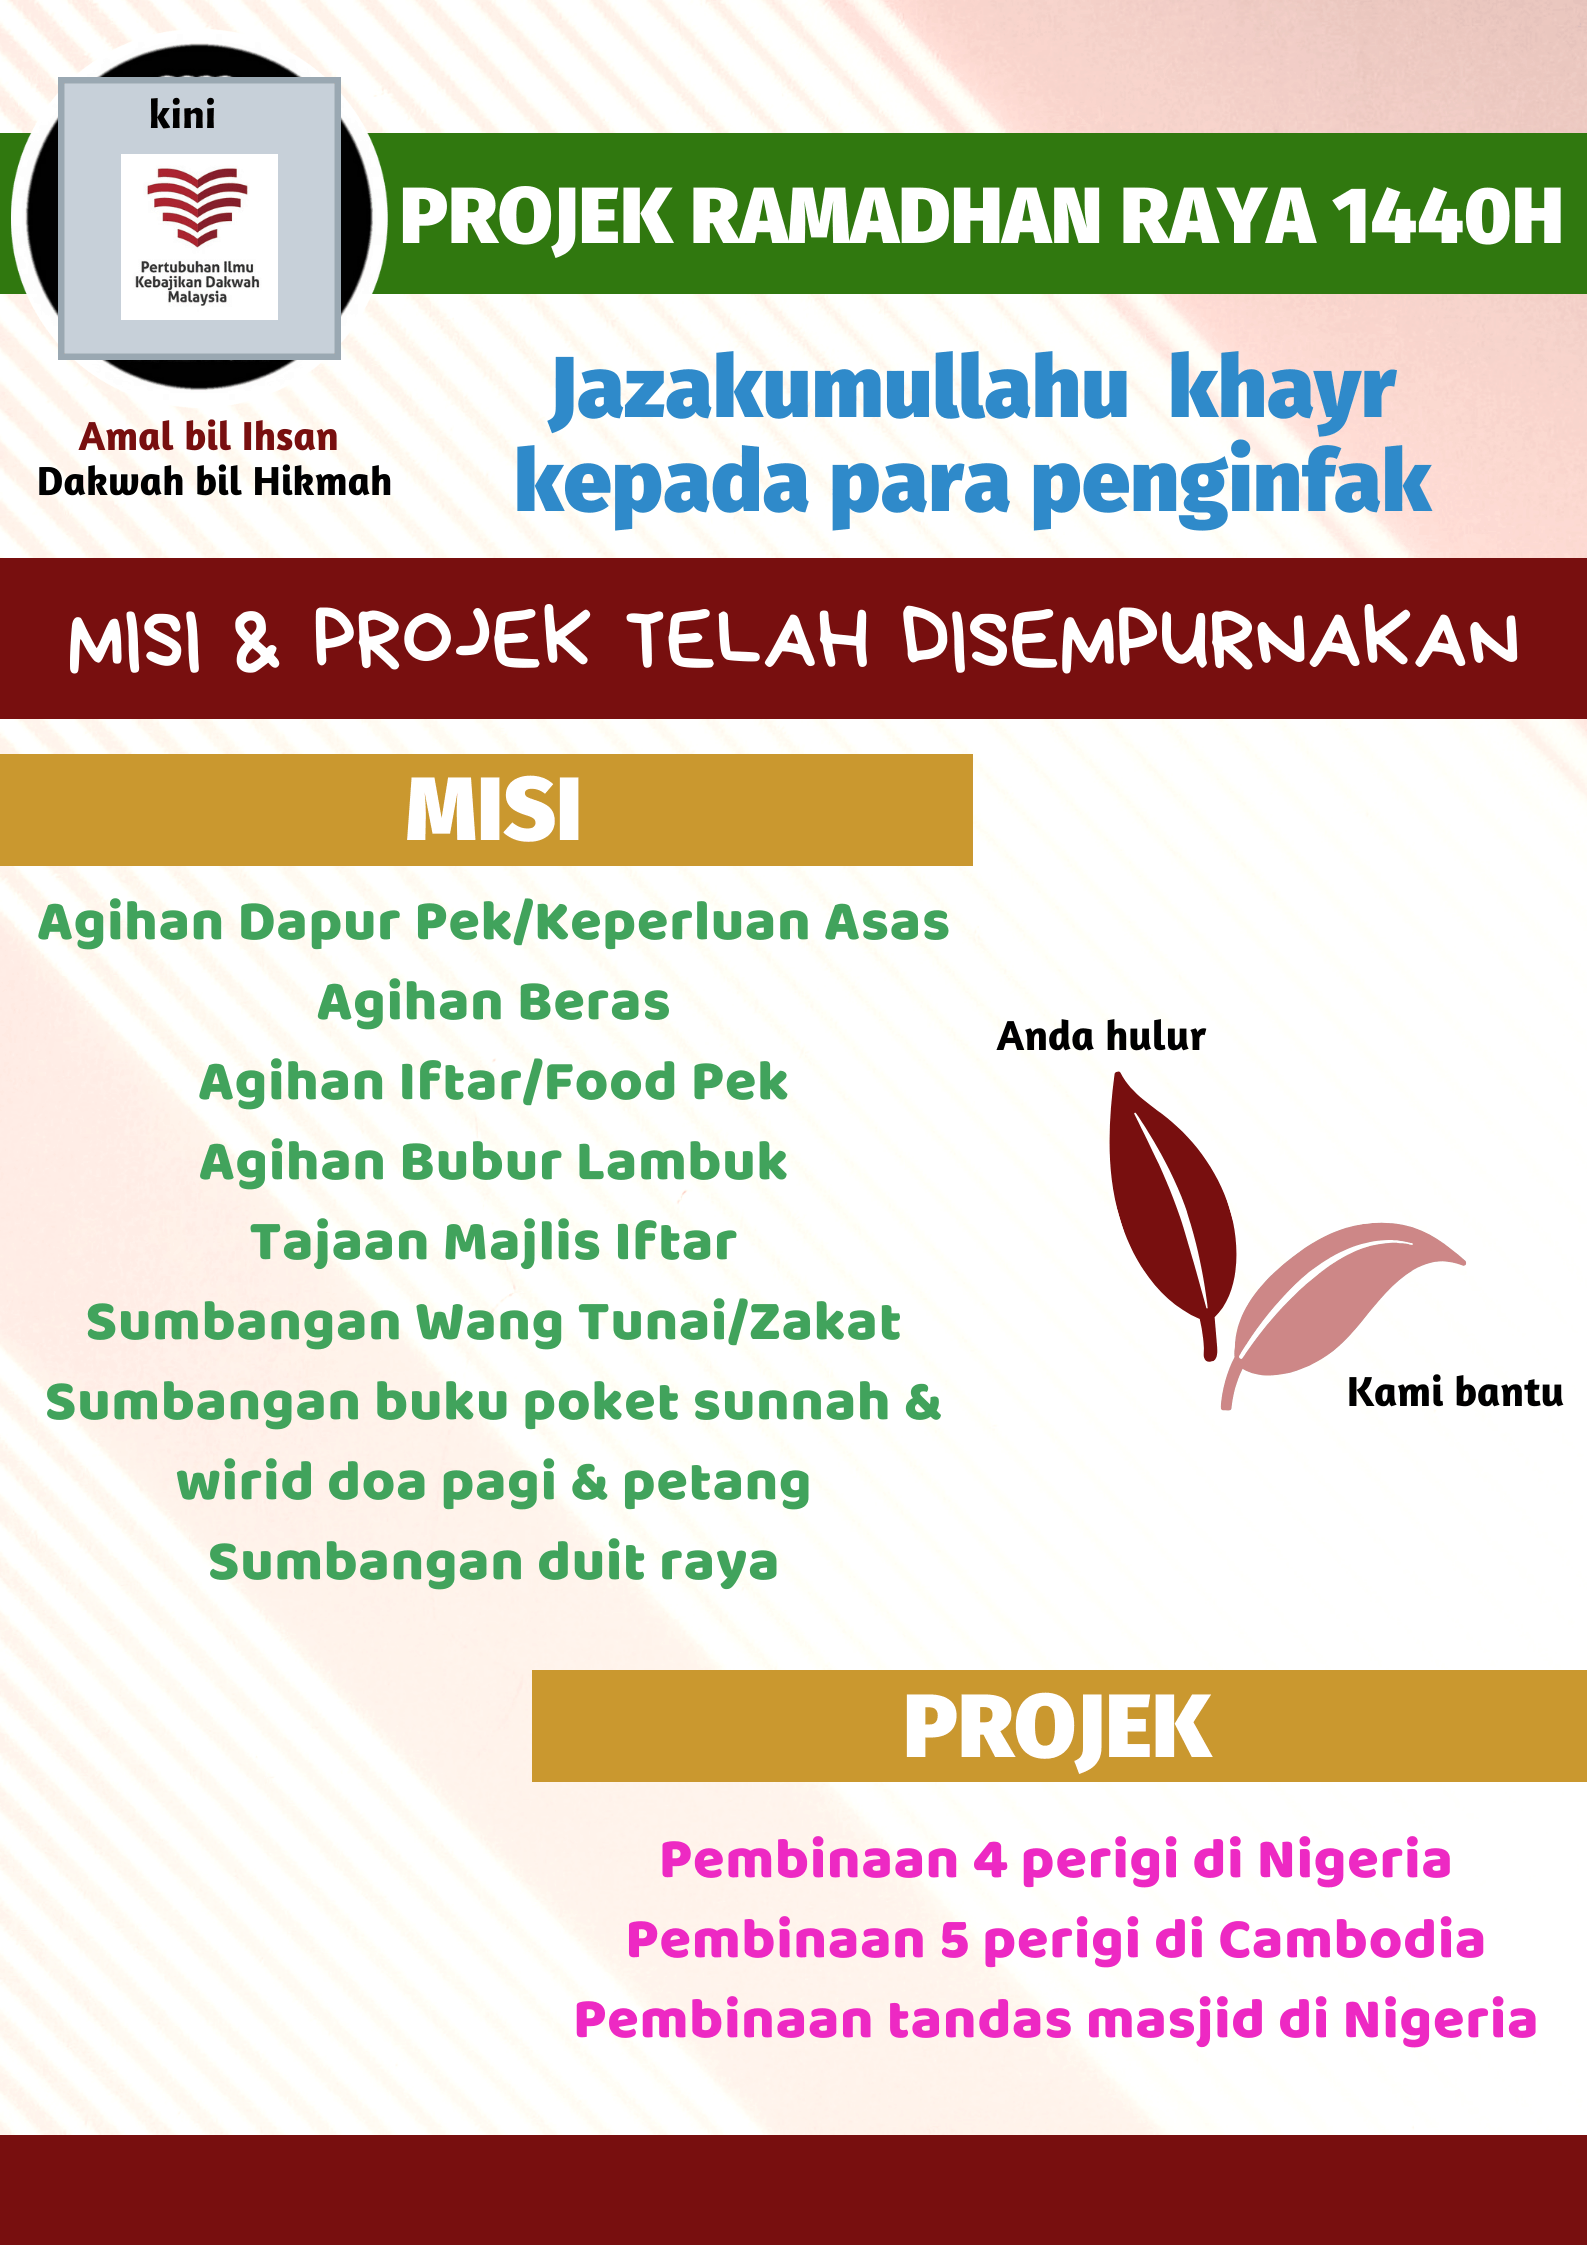 You are currently viewing Misi/Program/Projek Ramadhan-Raya 1440H